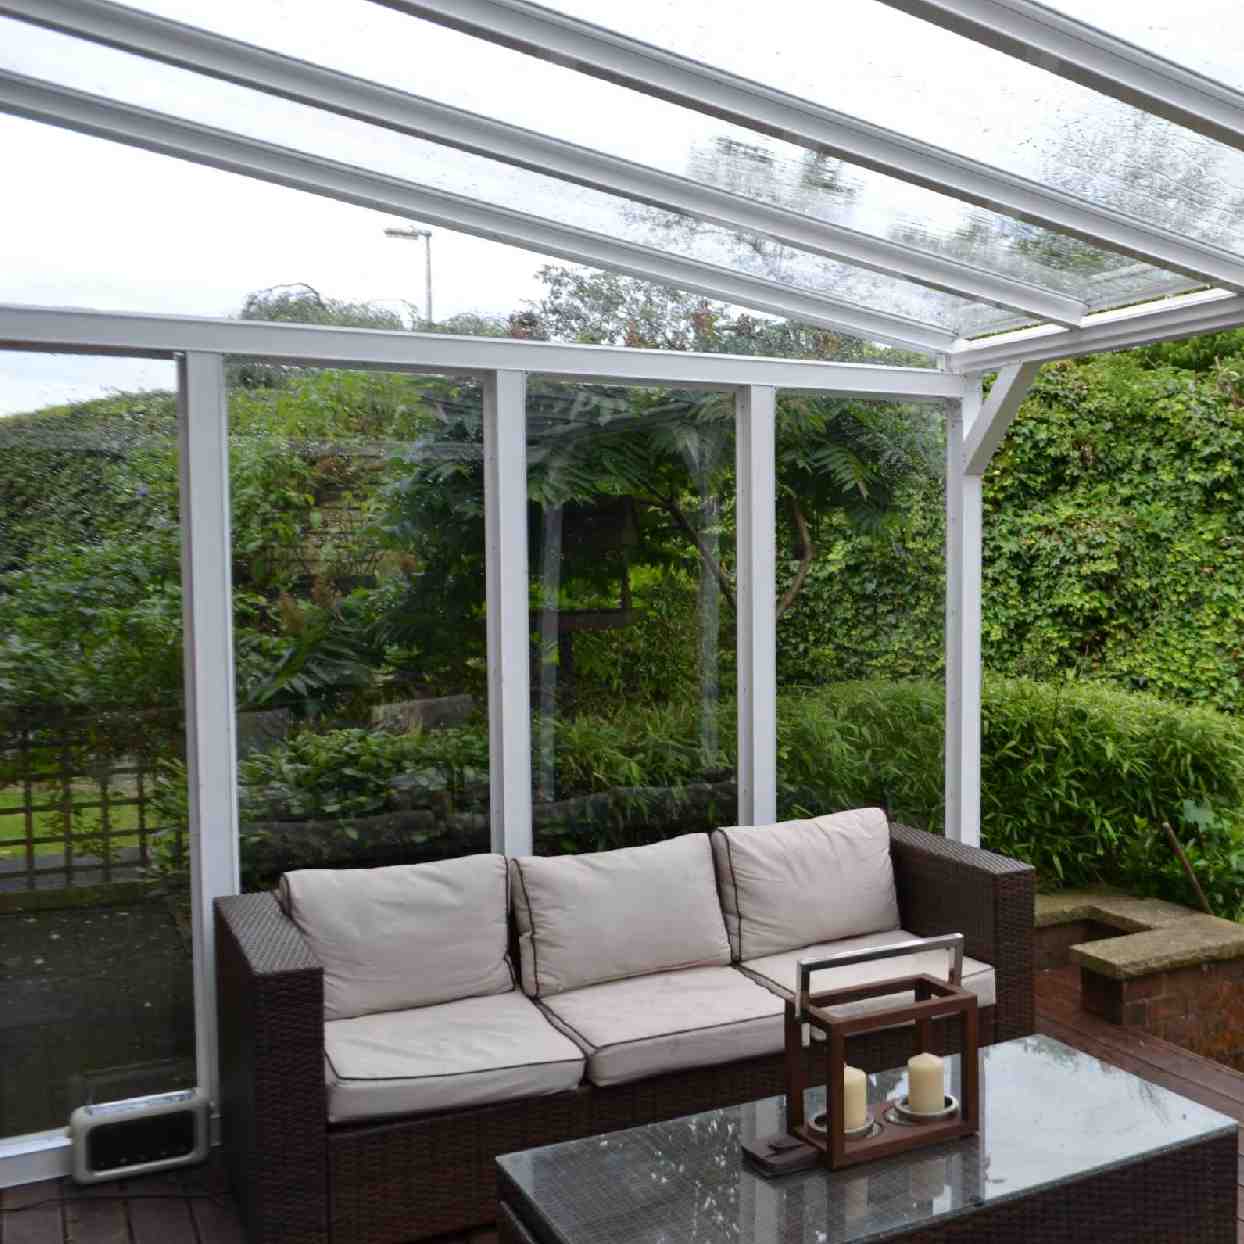 Buy Omega Verandah White with 16mm Polycarbonate Glazing - 10.7m (W) x 4.5m (P), (5) Supporting Posts online today